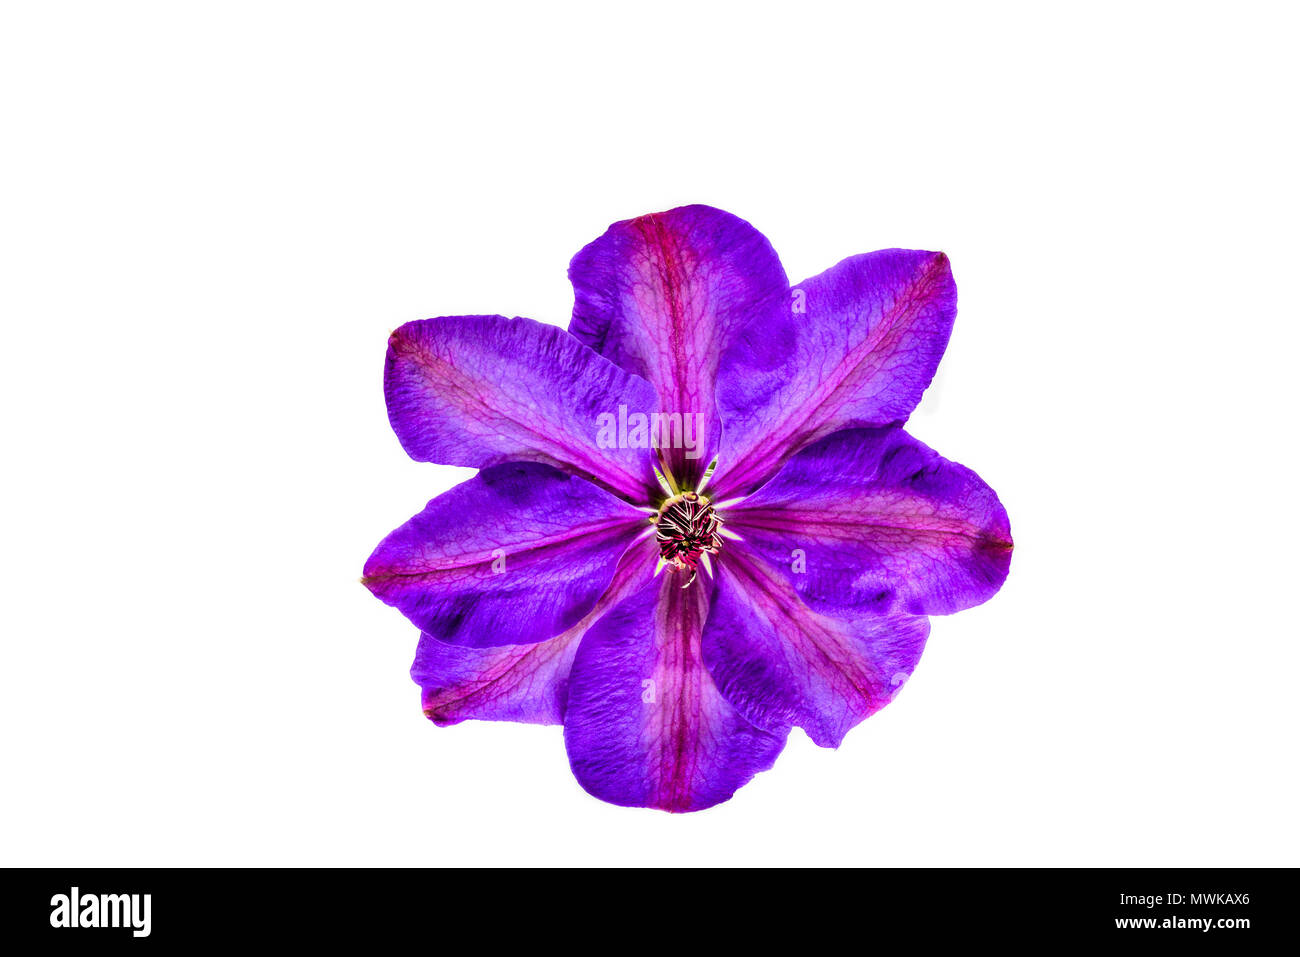 An eight petal purple colored flower from a clematis Elsa Spath climbing plant. Stock Photo